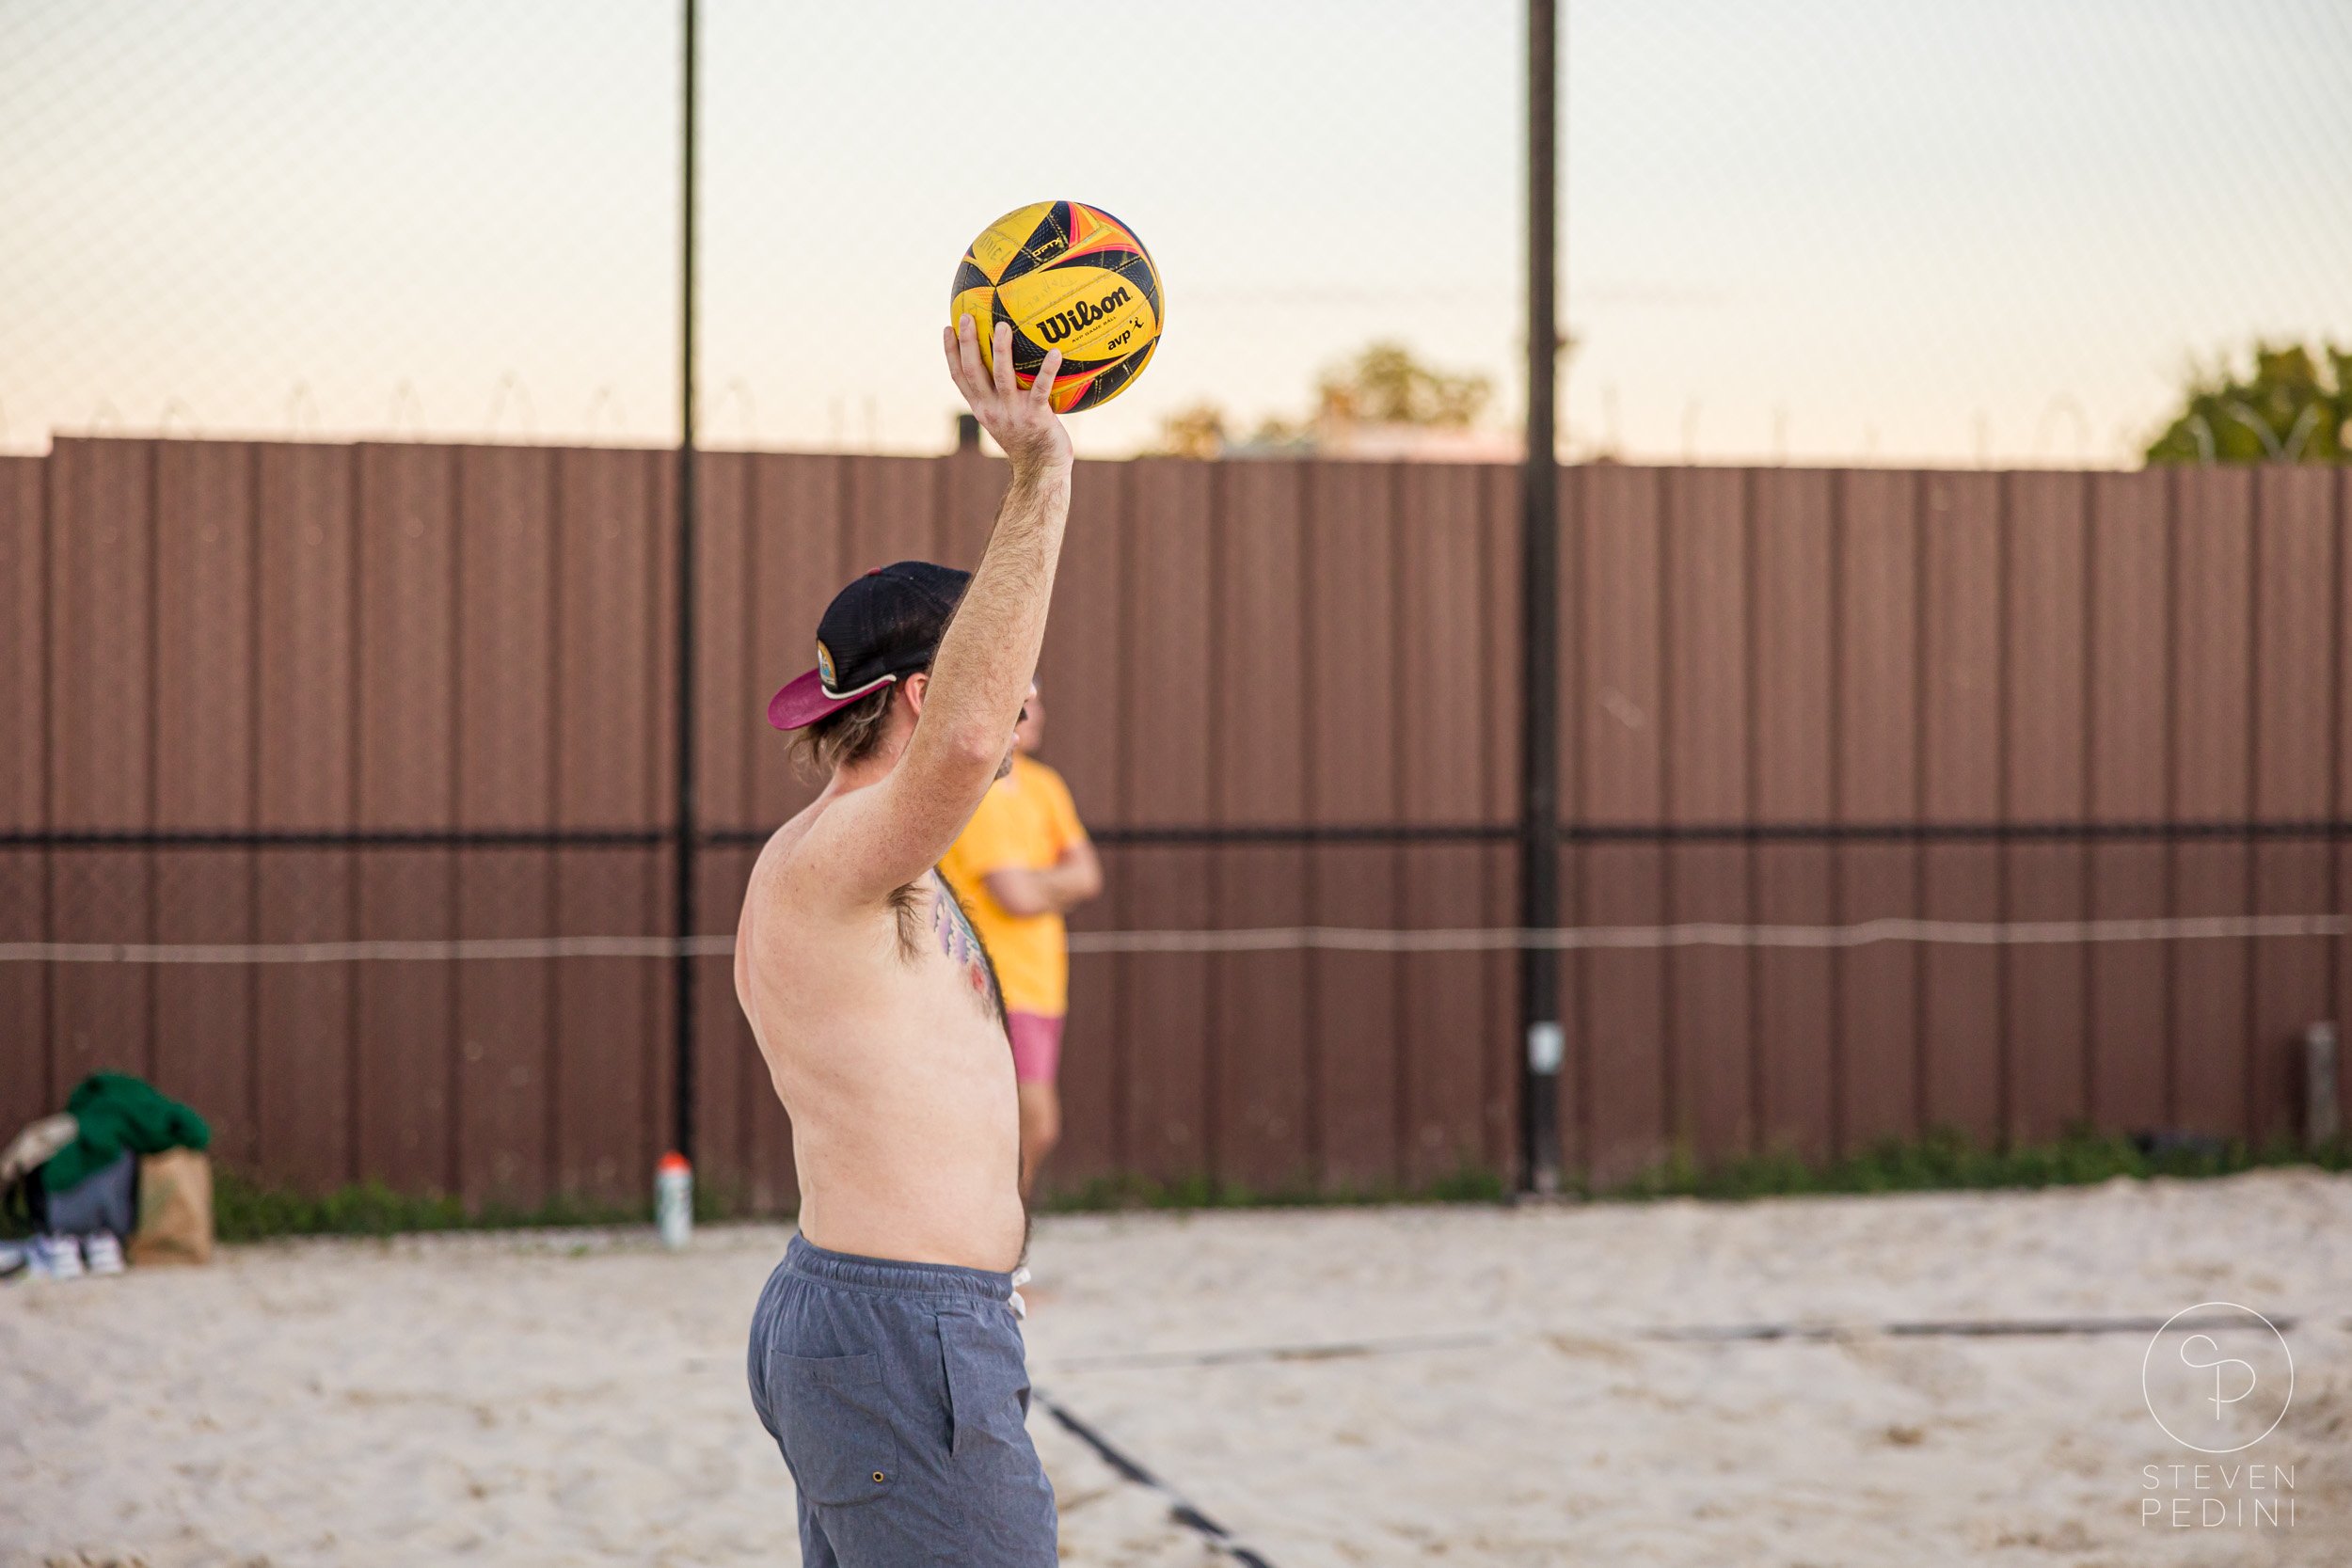 Steven Pedini Photography - Bumpy Pickle - Sand Volleyball - Houston TX - World Cup of Volleyball - 00231.jpg